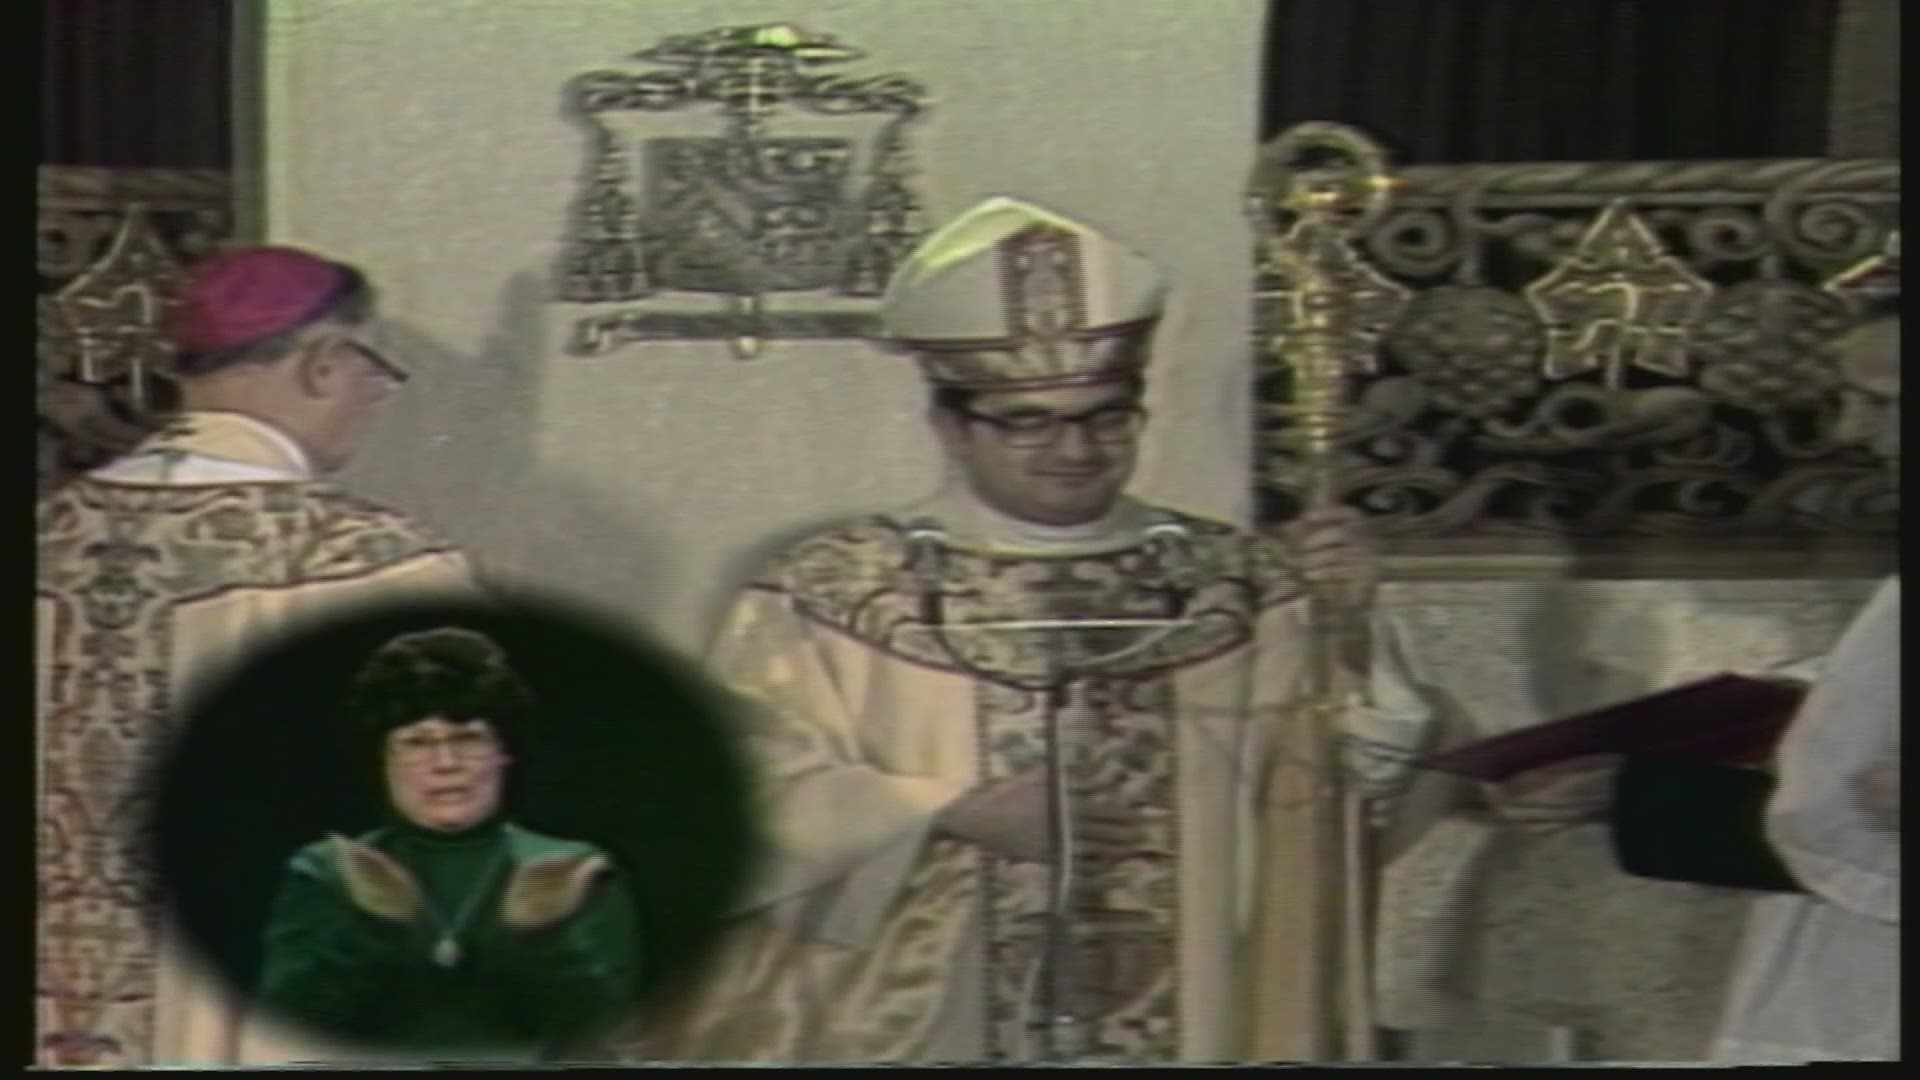 70 moments in WKYC history: Multi-camera live broadcast of installation of Bishop Anthony Pilla